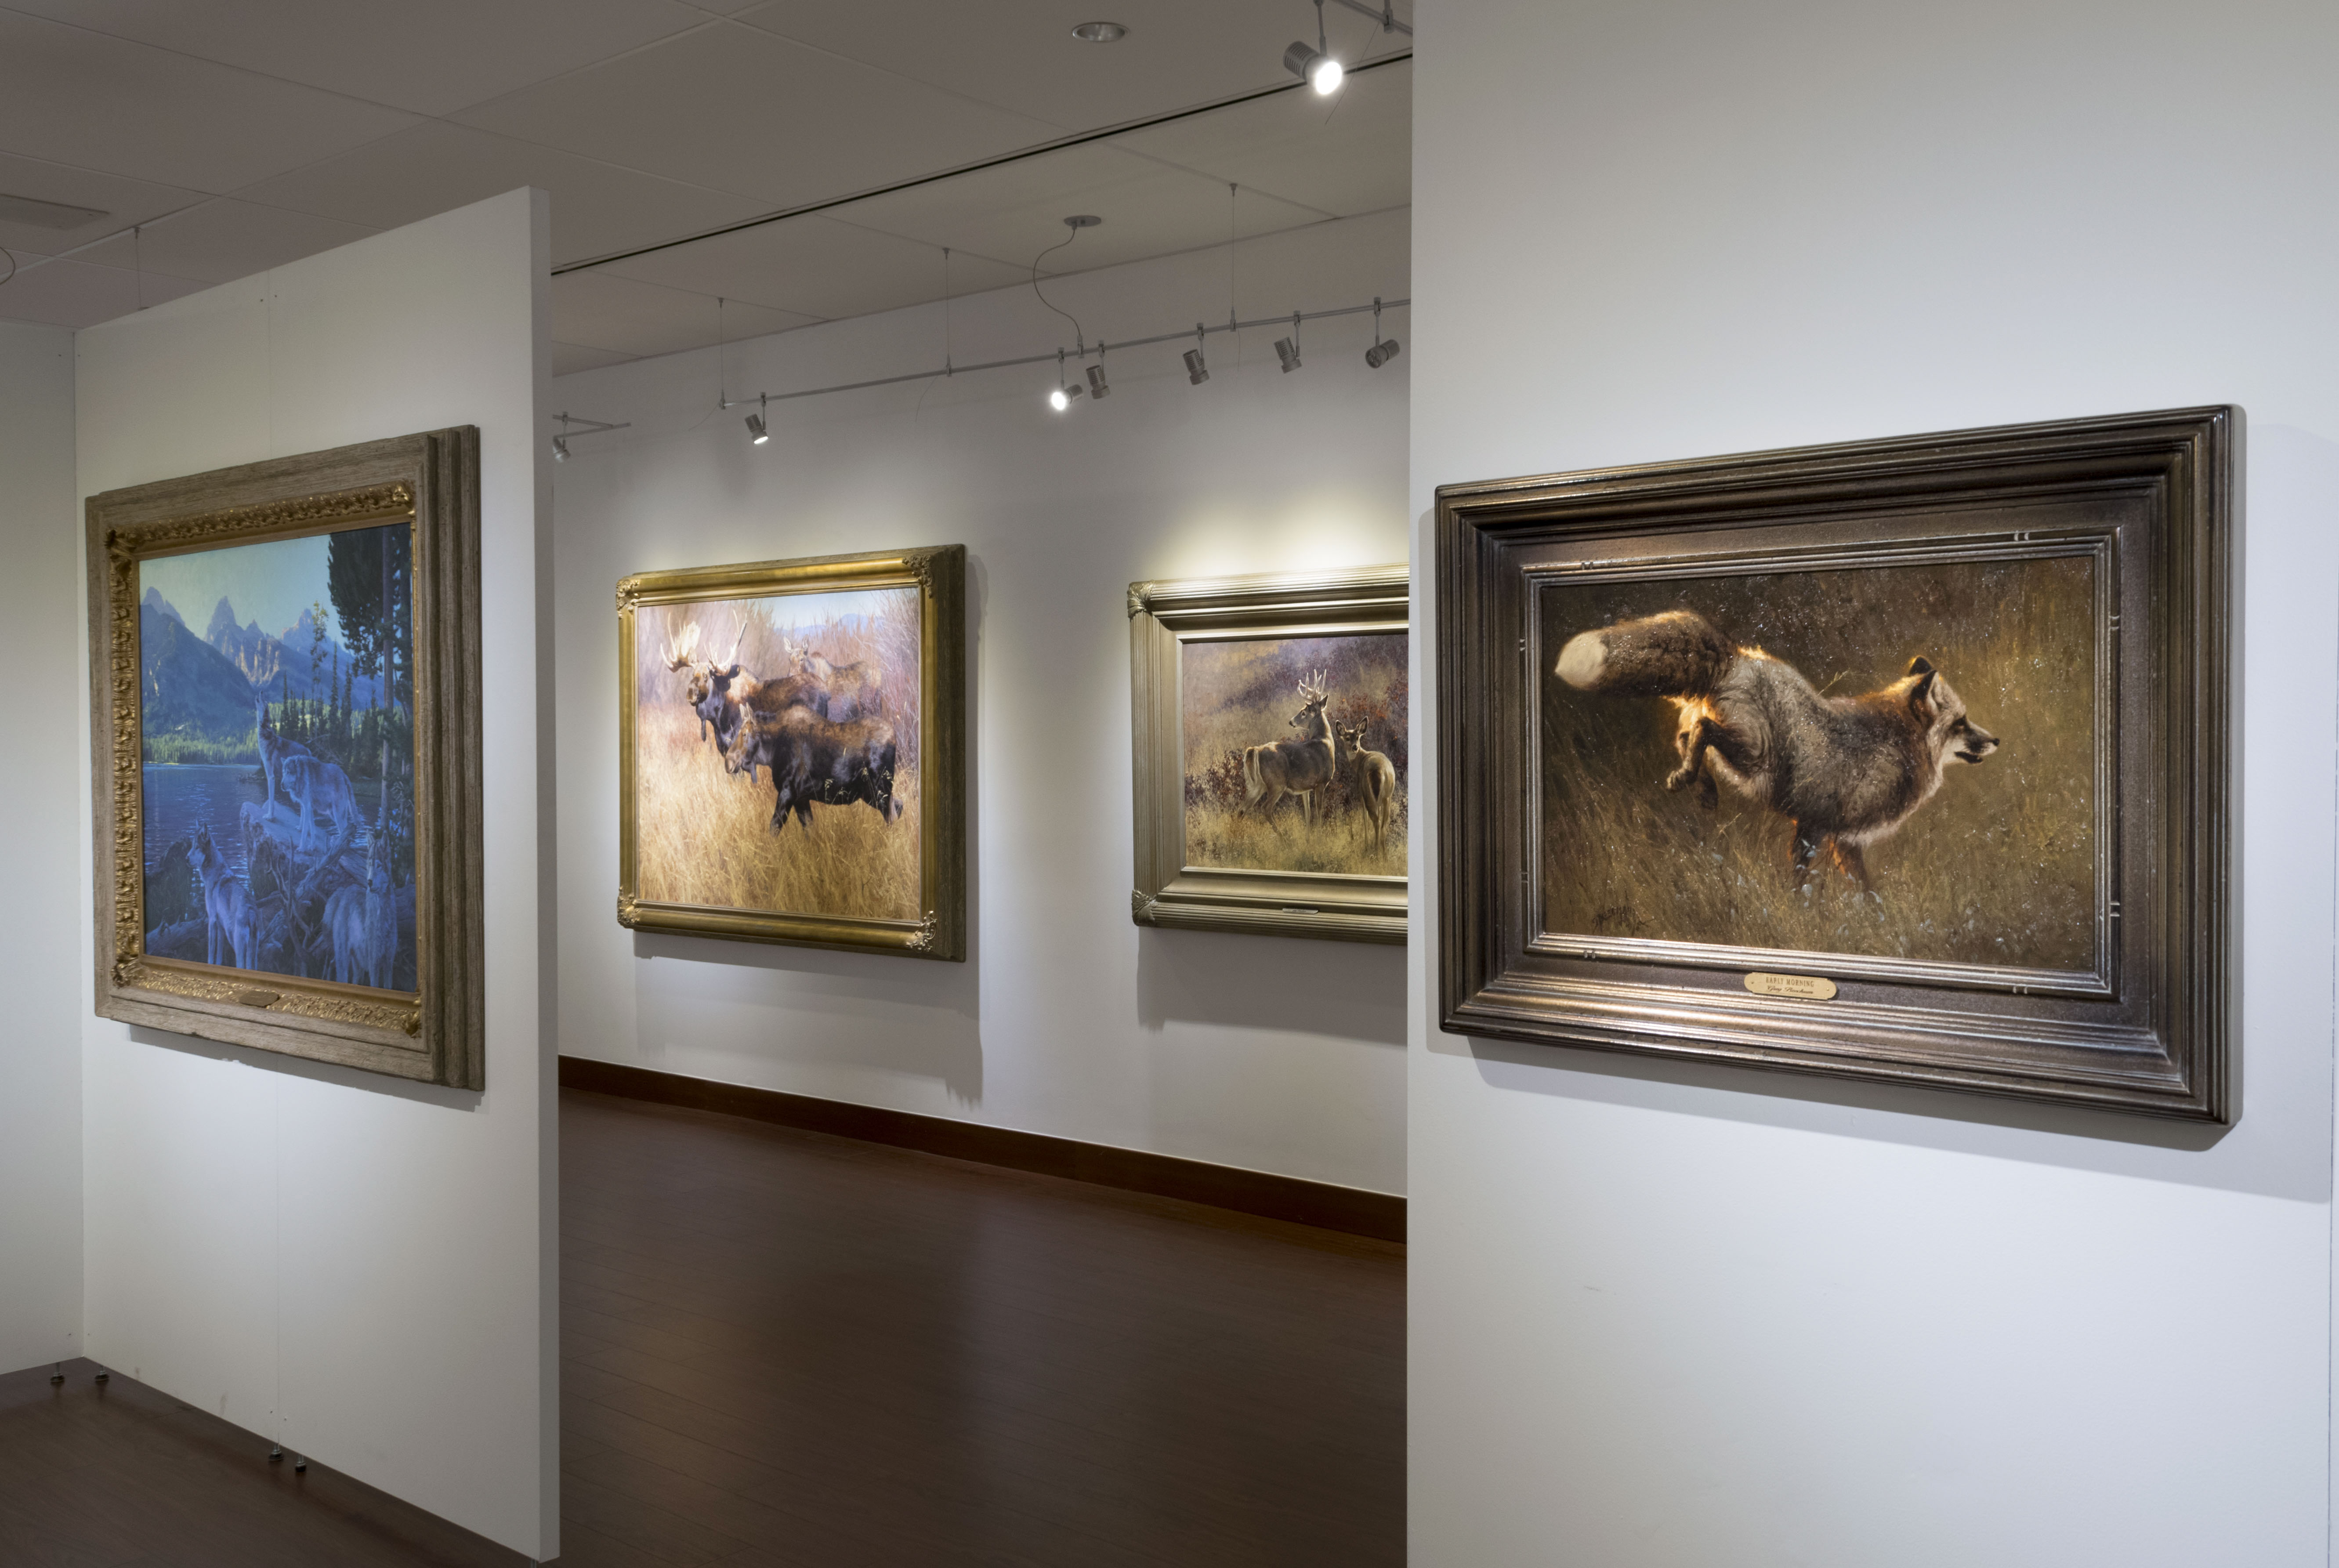 Installation View, Backof Gallery, Creatures of the Wild West: Selections from the Don B. Huntley Collection, 2016.